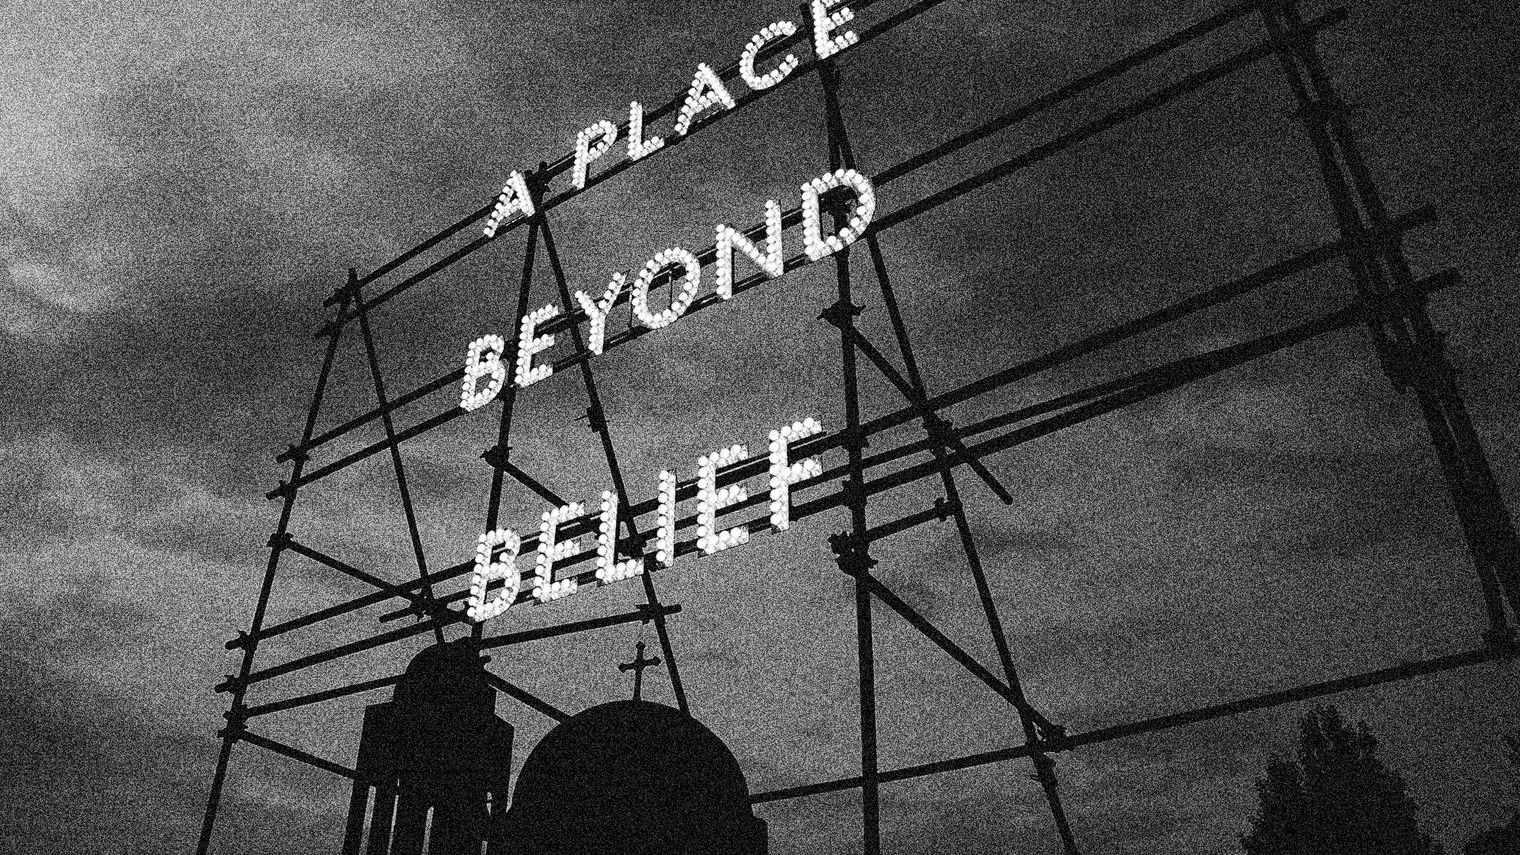 A neon sign mounted to scaffolding reads "A place beyond belief".